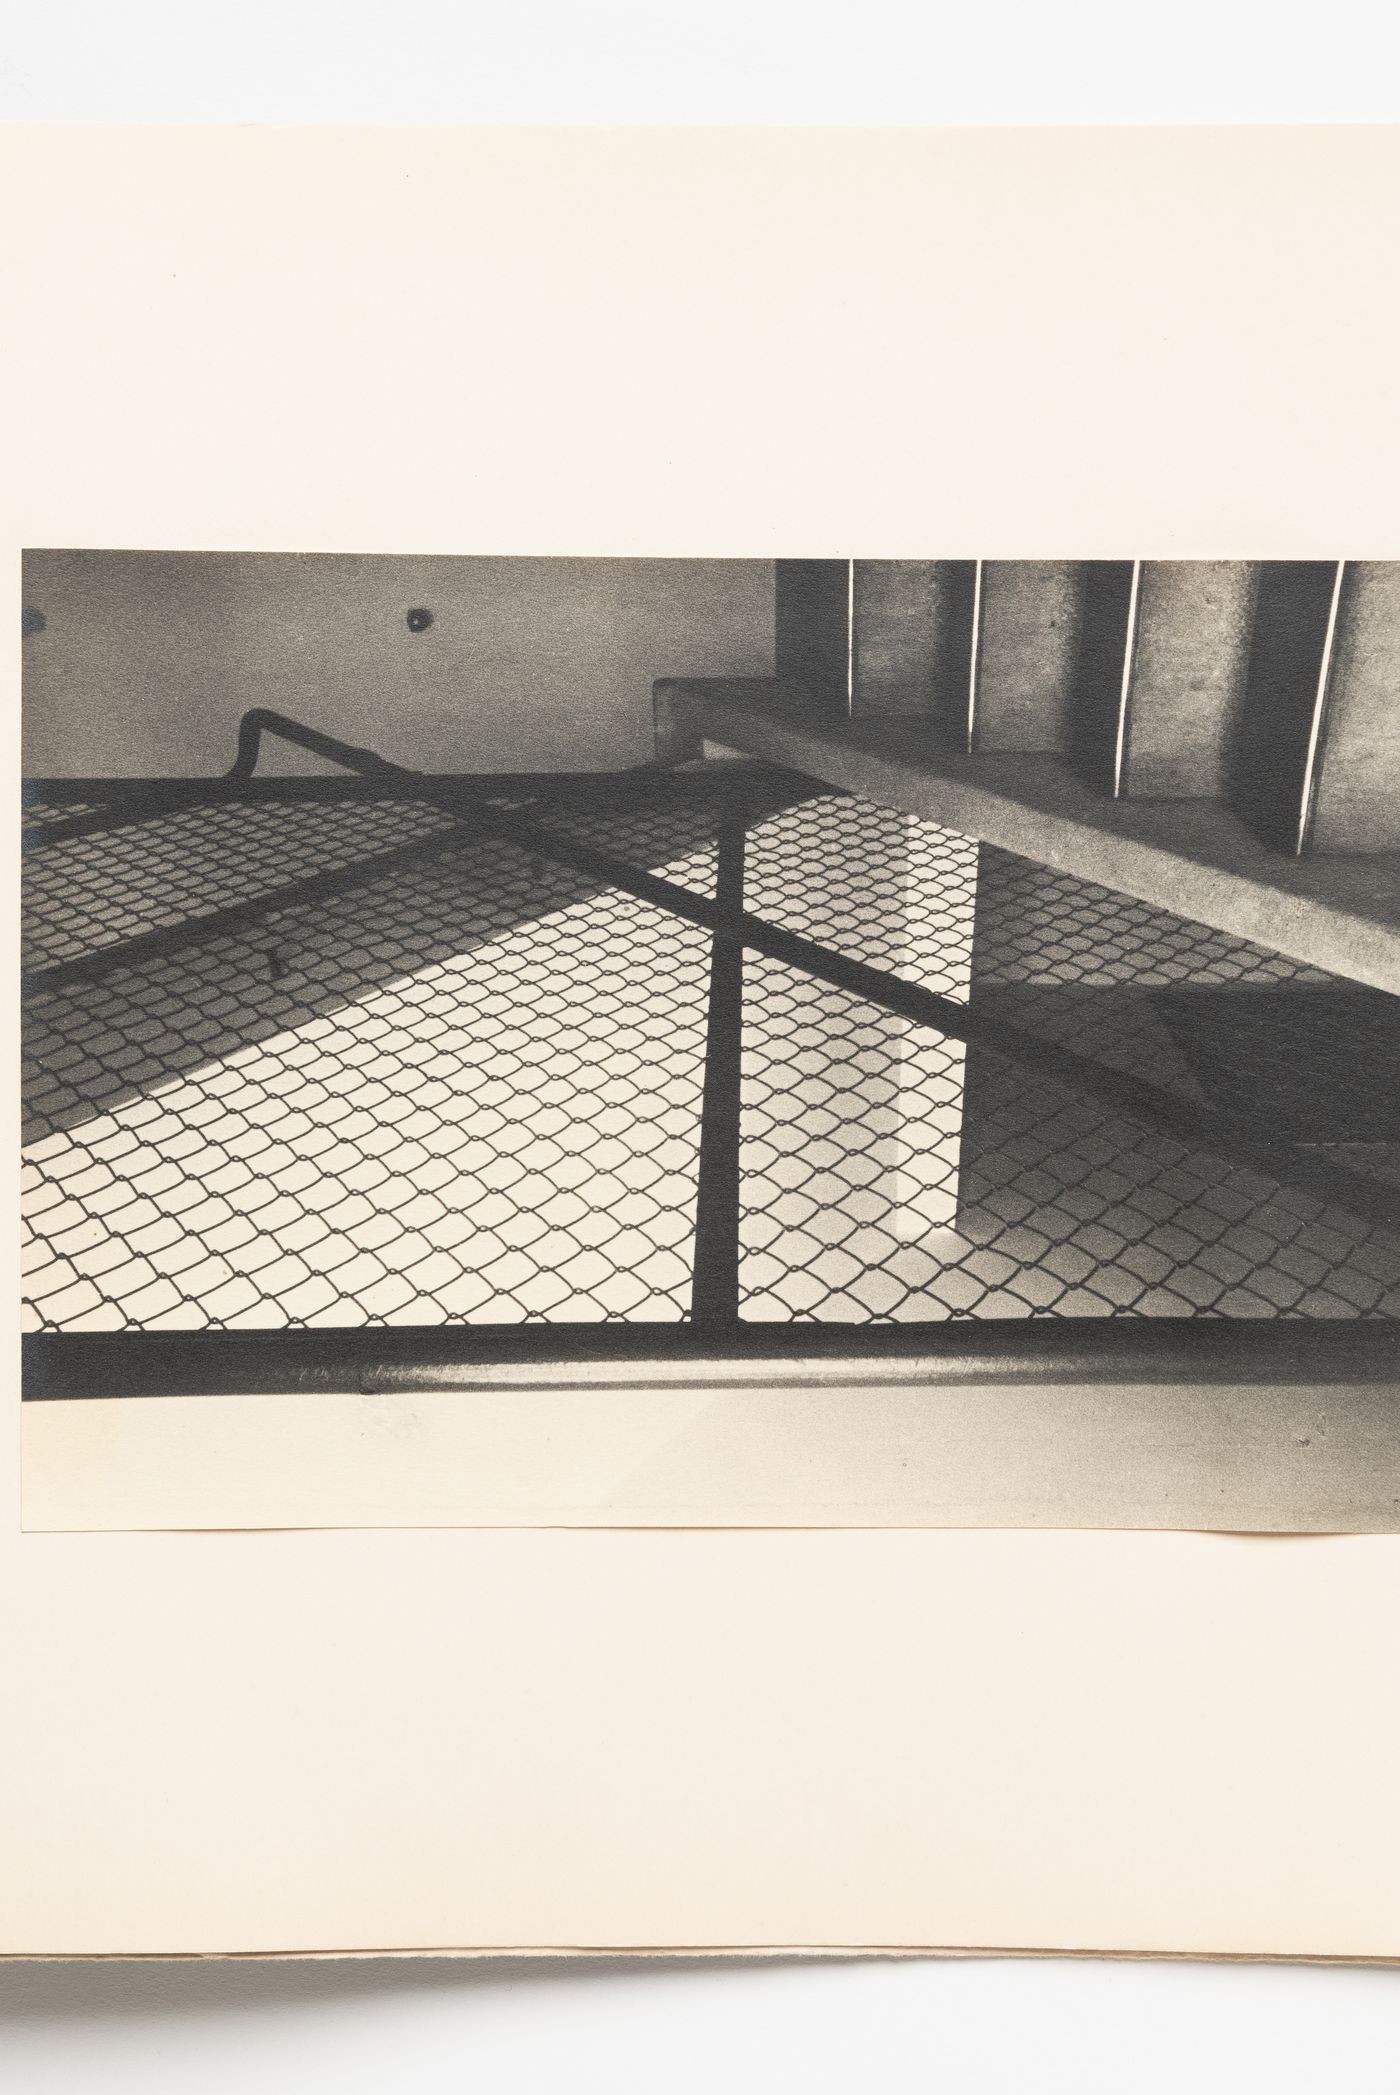 Interior view of stairwell and chain link partition, Hellerhof Housing Estate, Frankfurt am Main, Germany